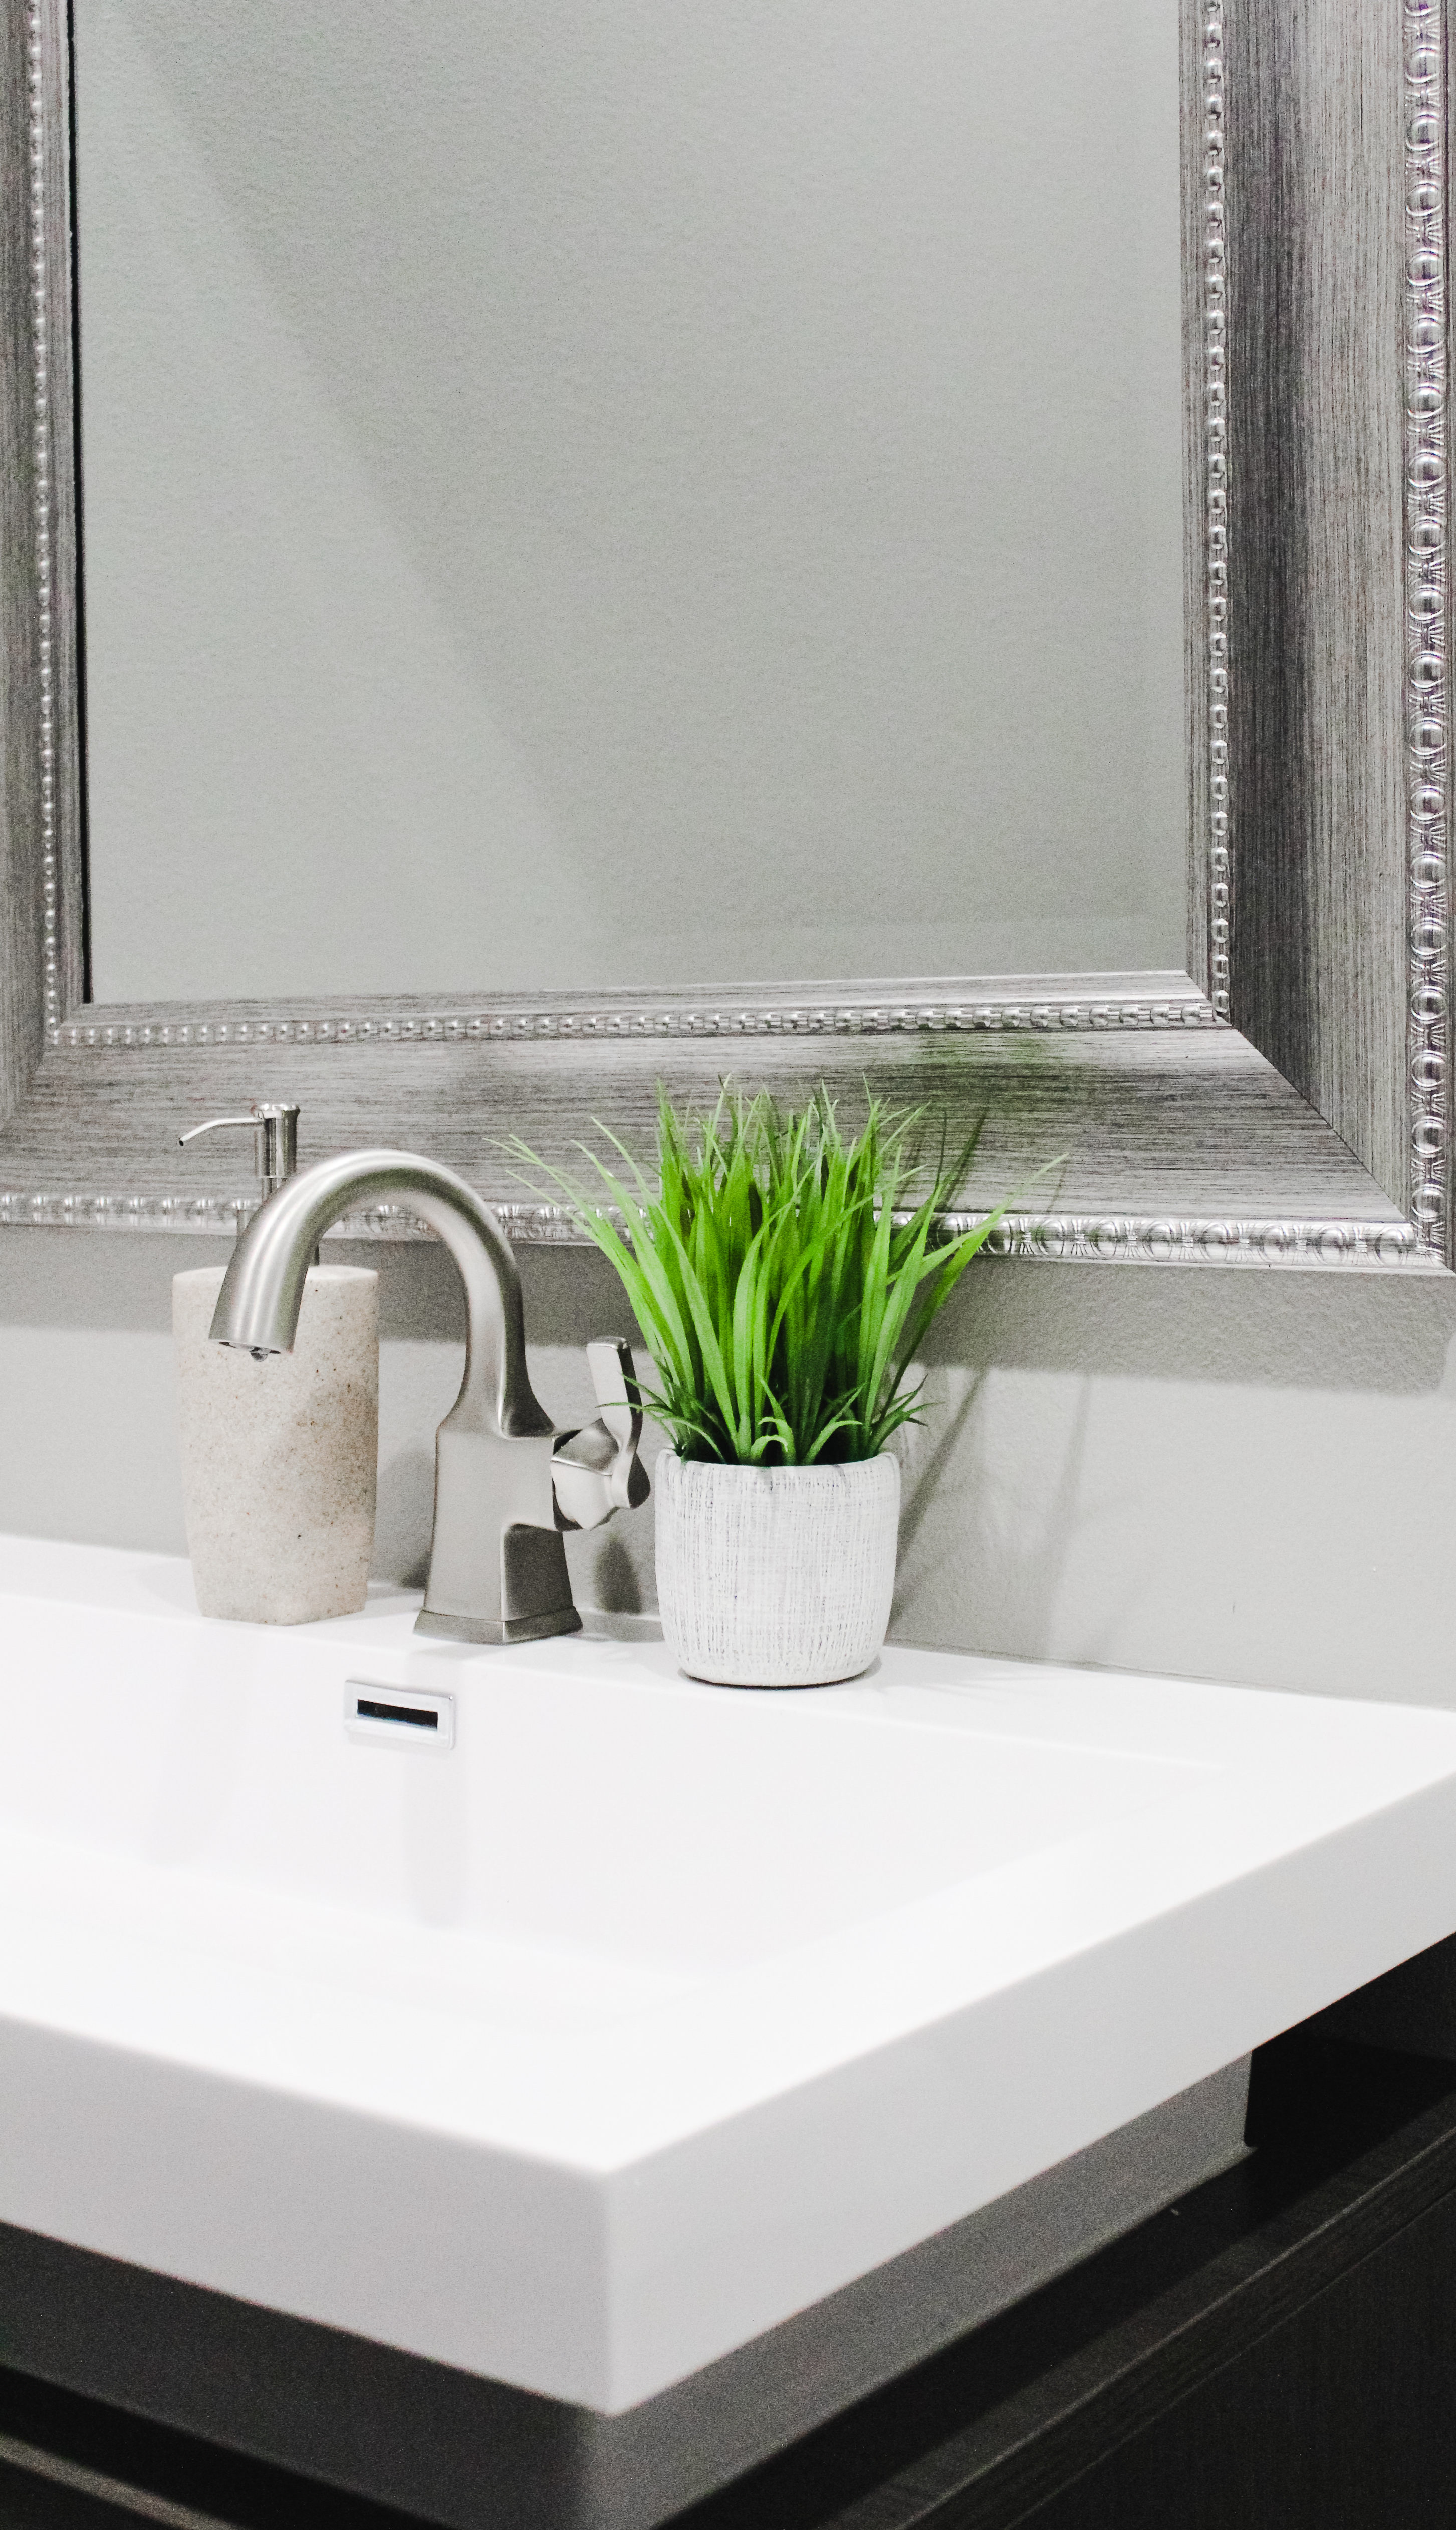 Modern Bathroom Sink. Brushed Nickel Mirror, Silver Faucet, Potted Greenery on Counter, Ivory Soap Dispenser